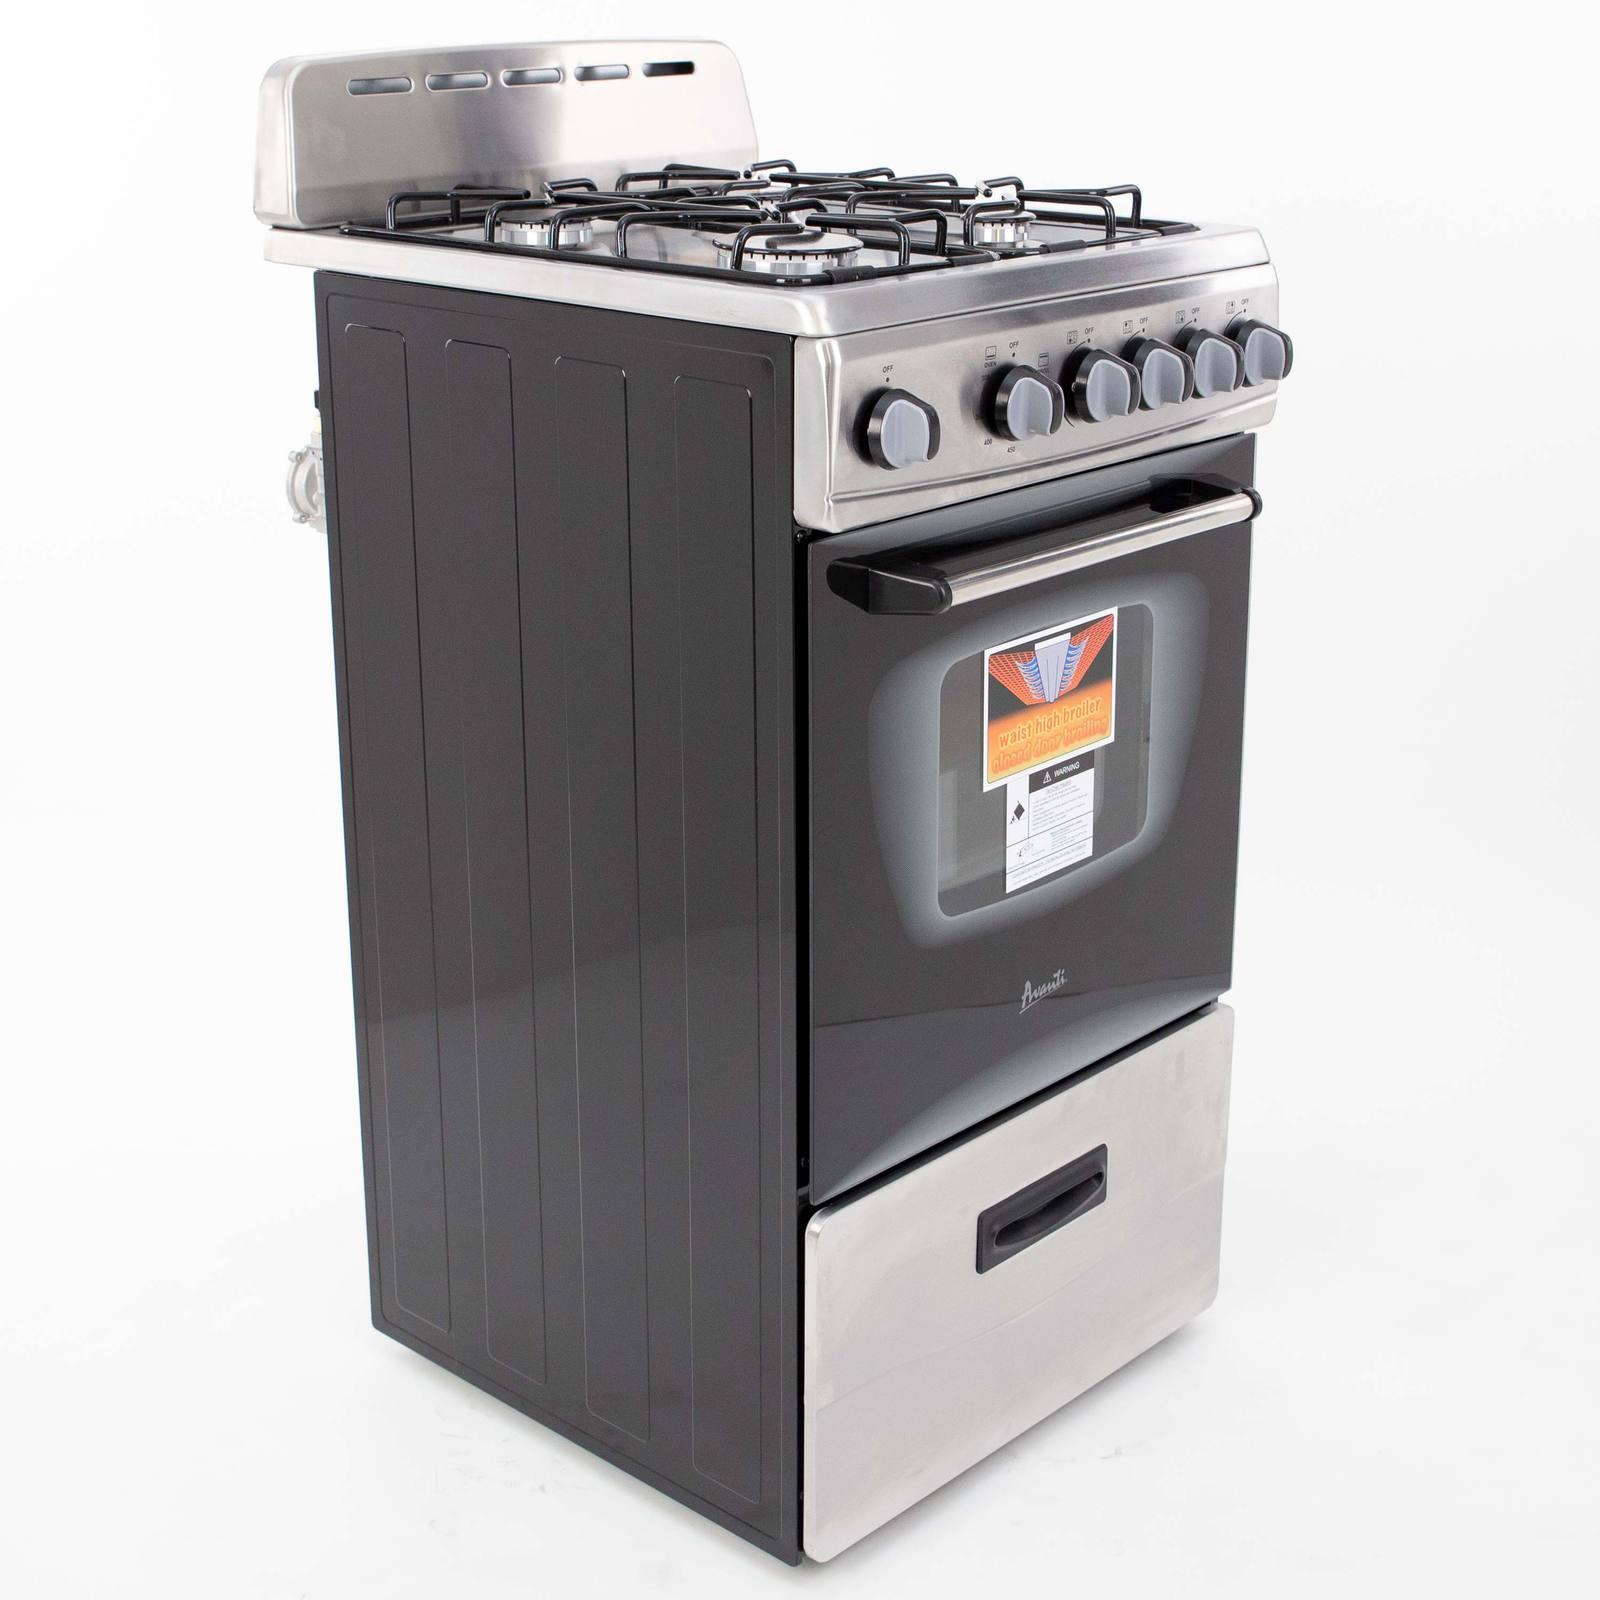 Avanti 20" Compact Gas Range Oven - Stainless Steel / 2.1 cu. ft.